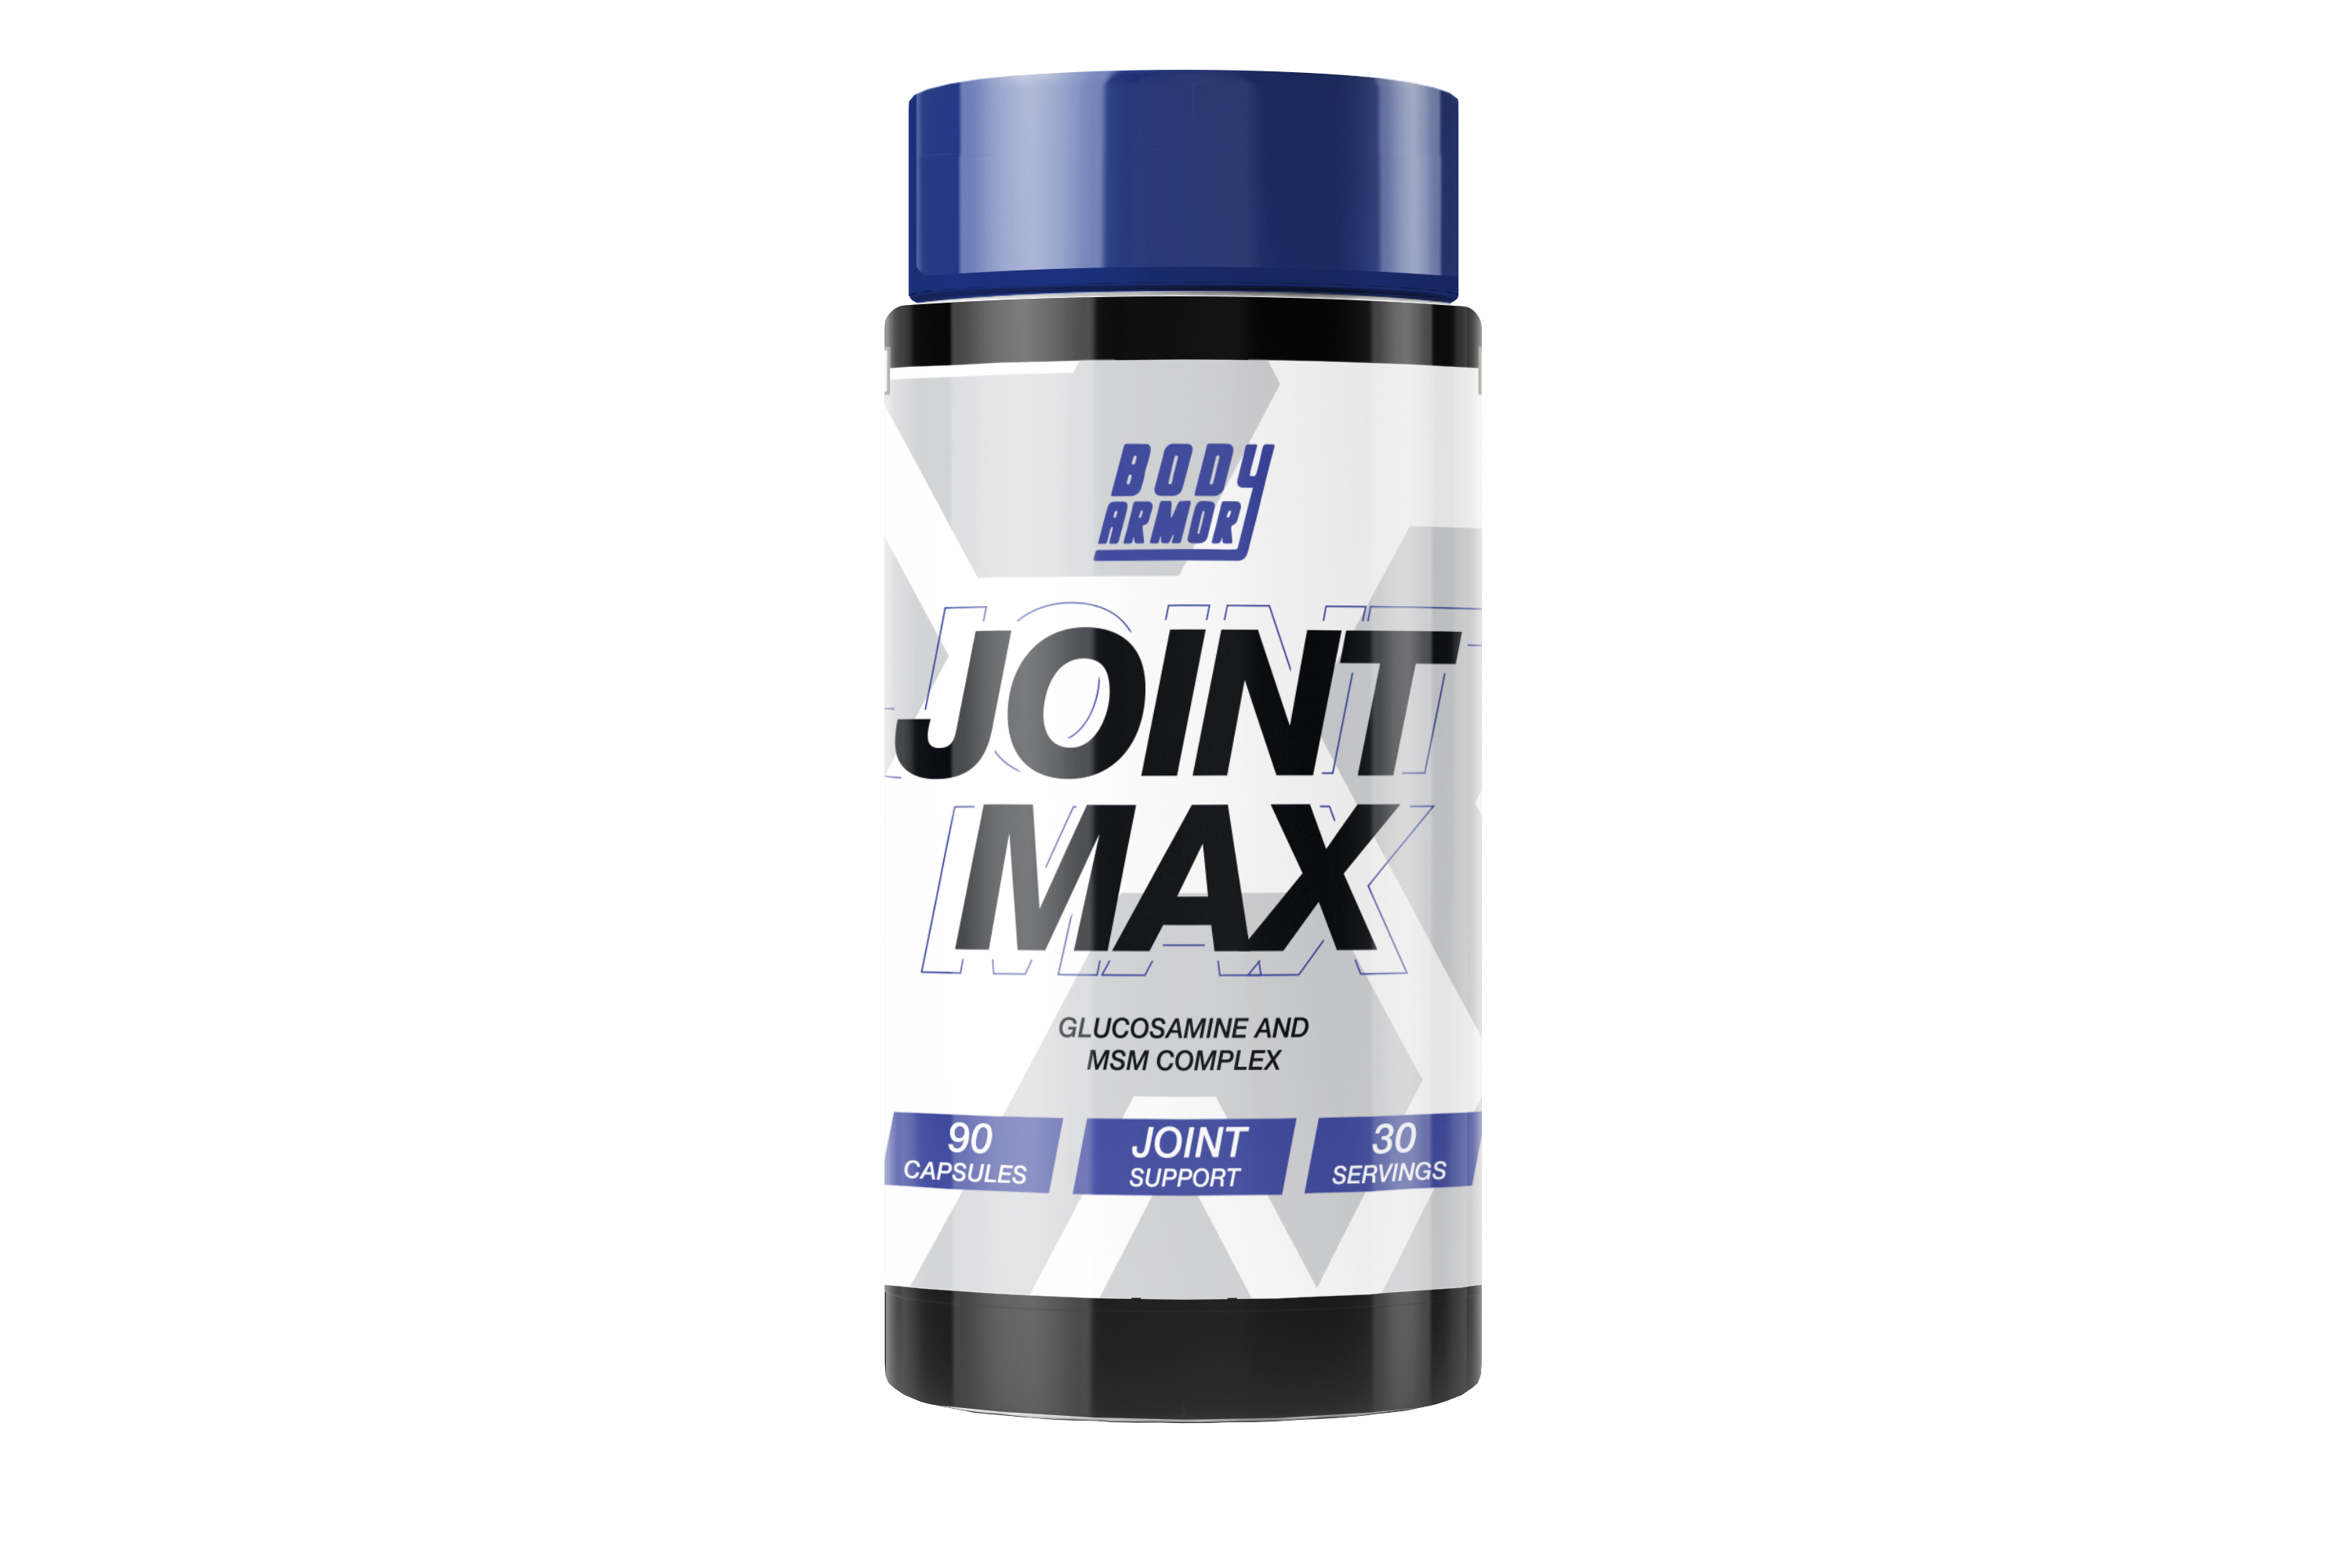 Body Armor Joint Max – Glucosamine and MSM Complex